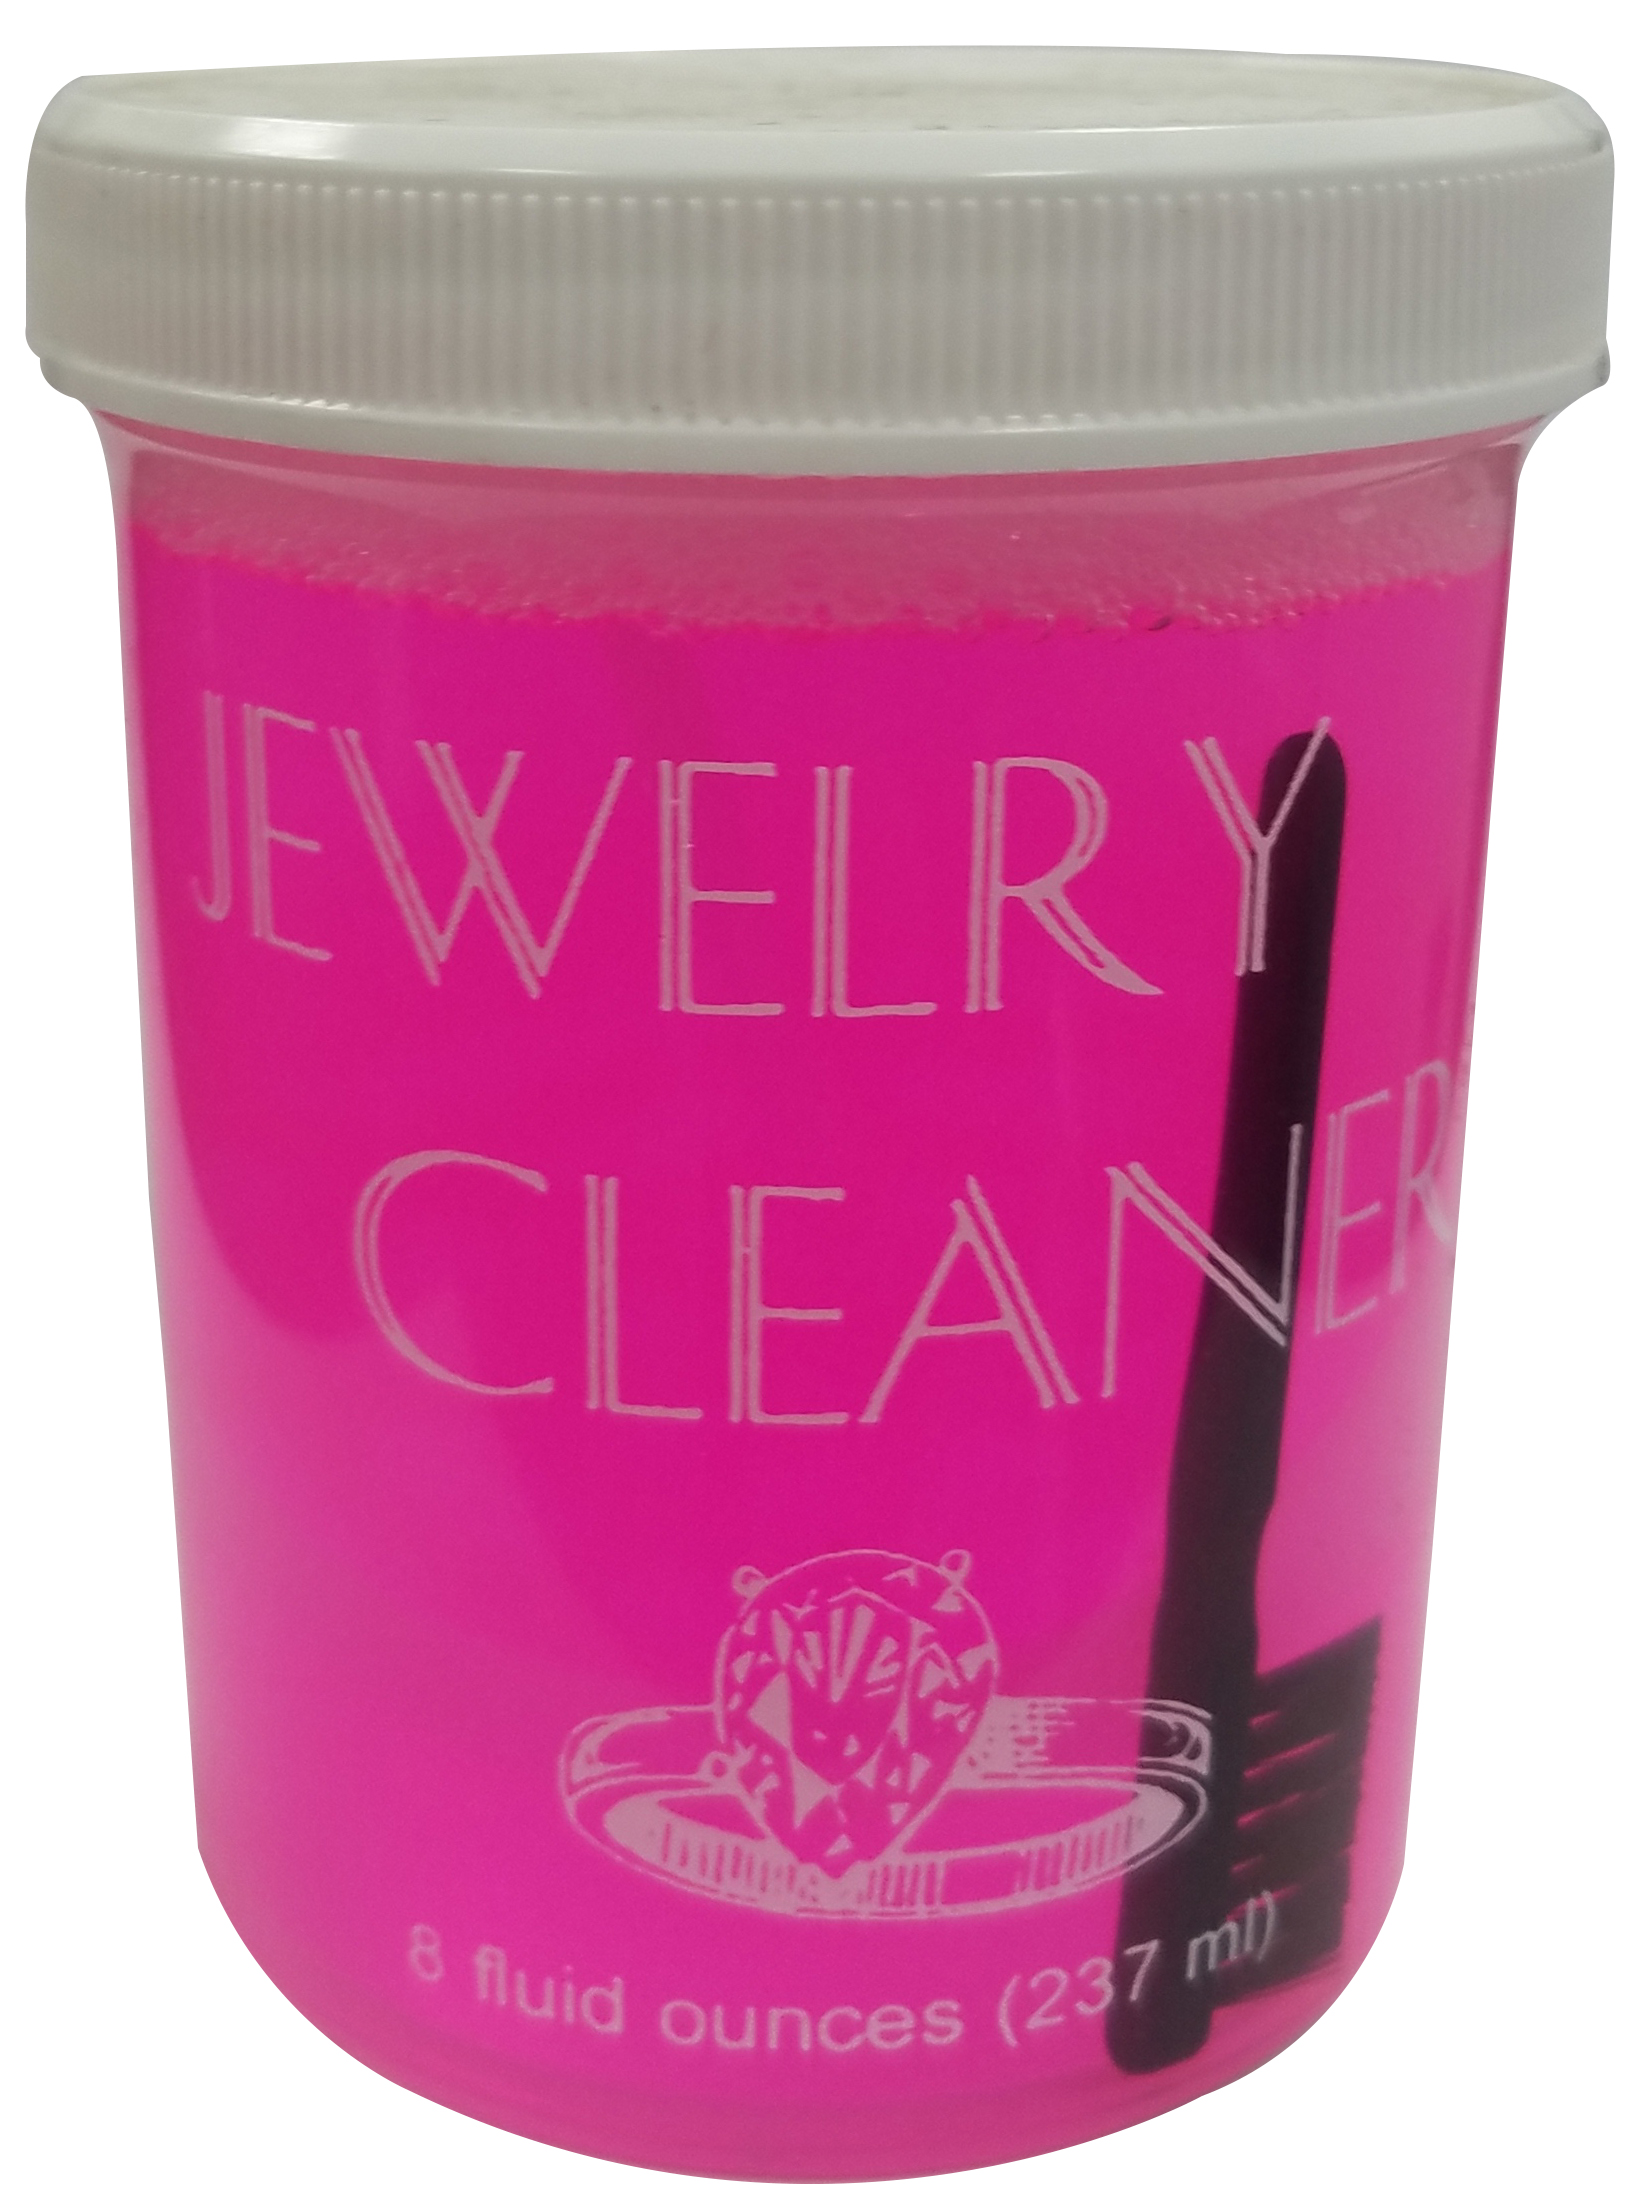 JEWELRY CLEANER/PINK, 8 ounces with basket & brush (Non Ammoniated)